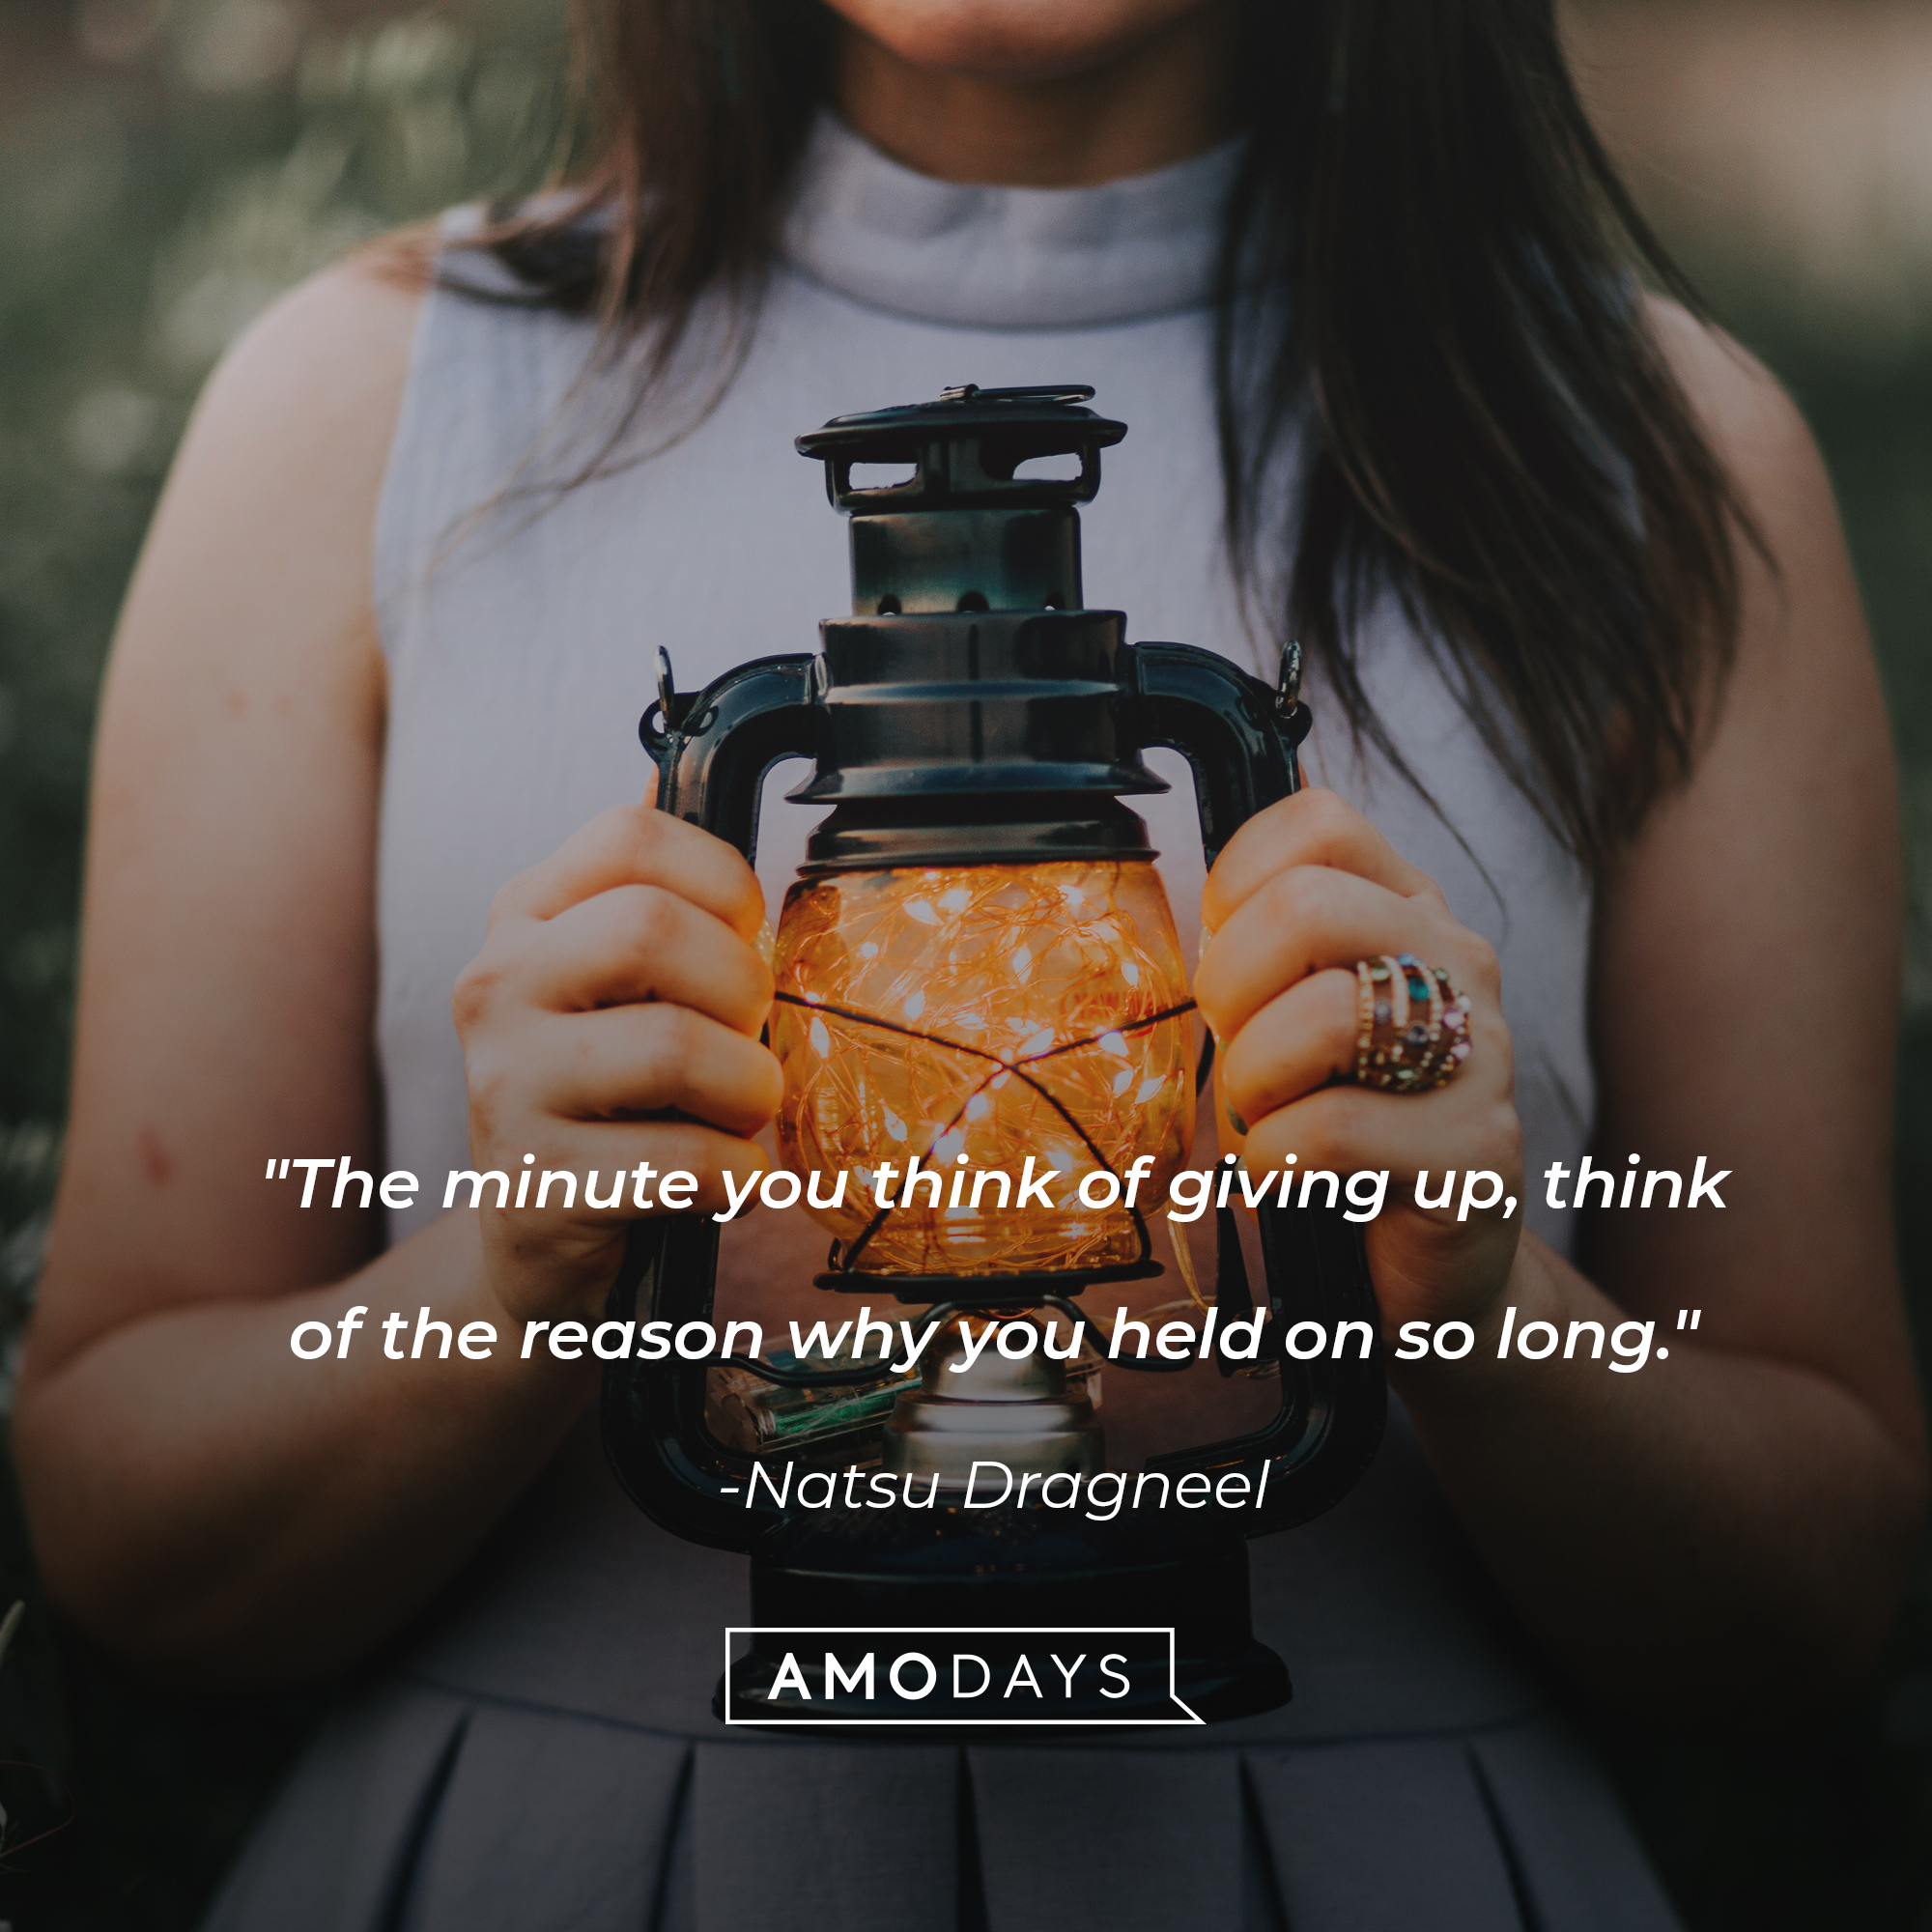 Natsu Dragneel's quote: "The minute you think of giving up, think of the reason why you held on so long." | Image: Unsplash